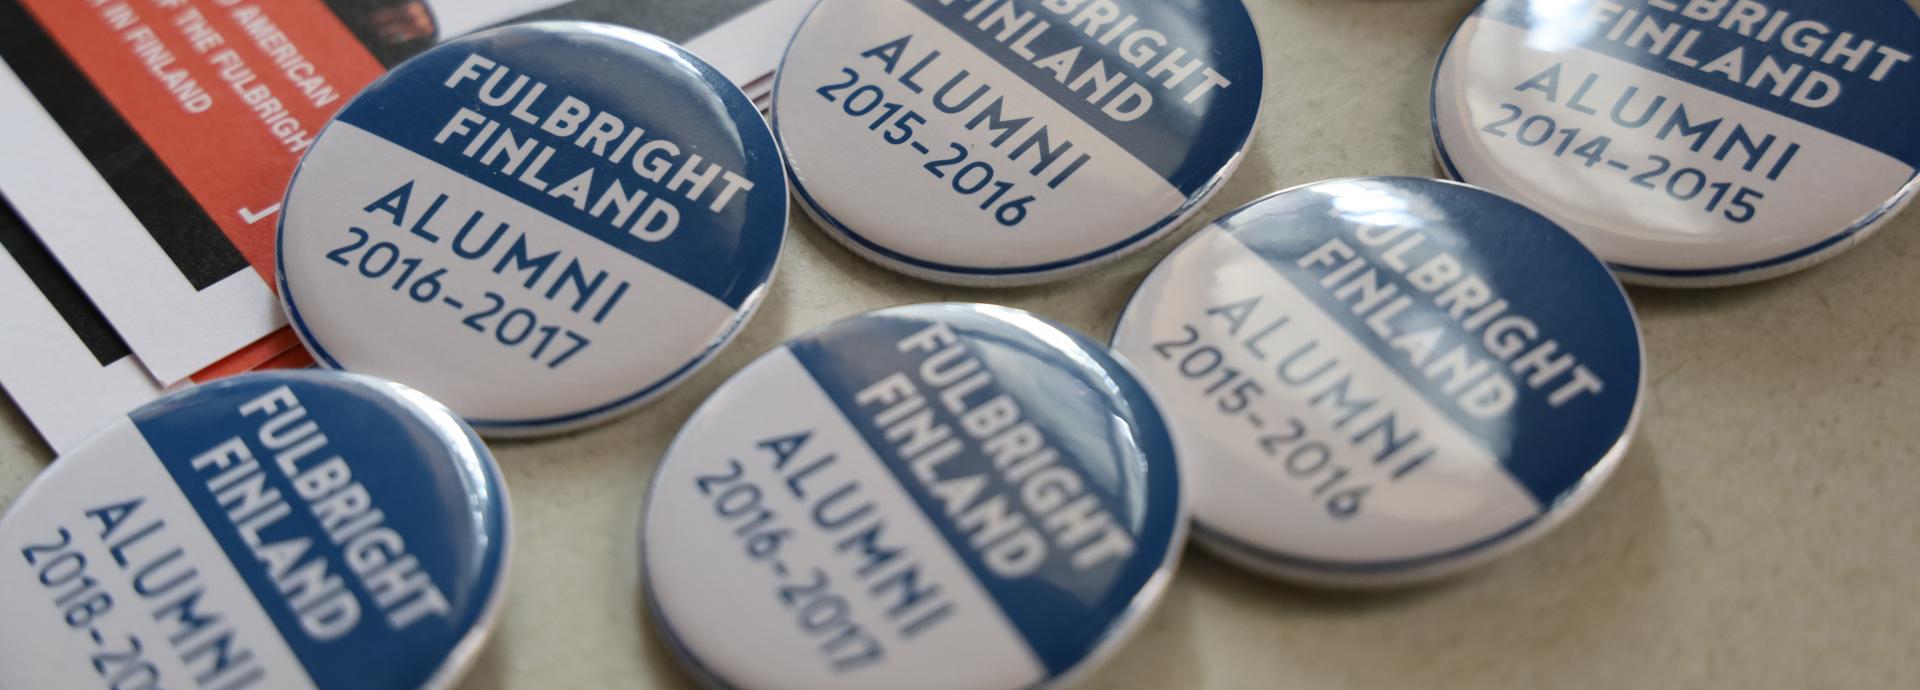 Picture on pins in an alumni event